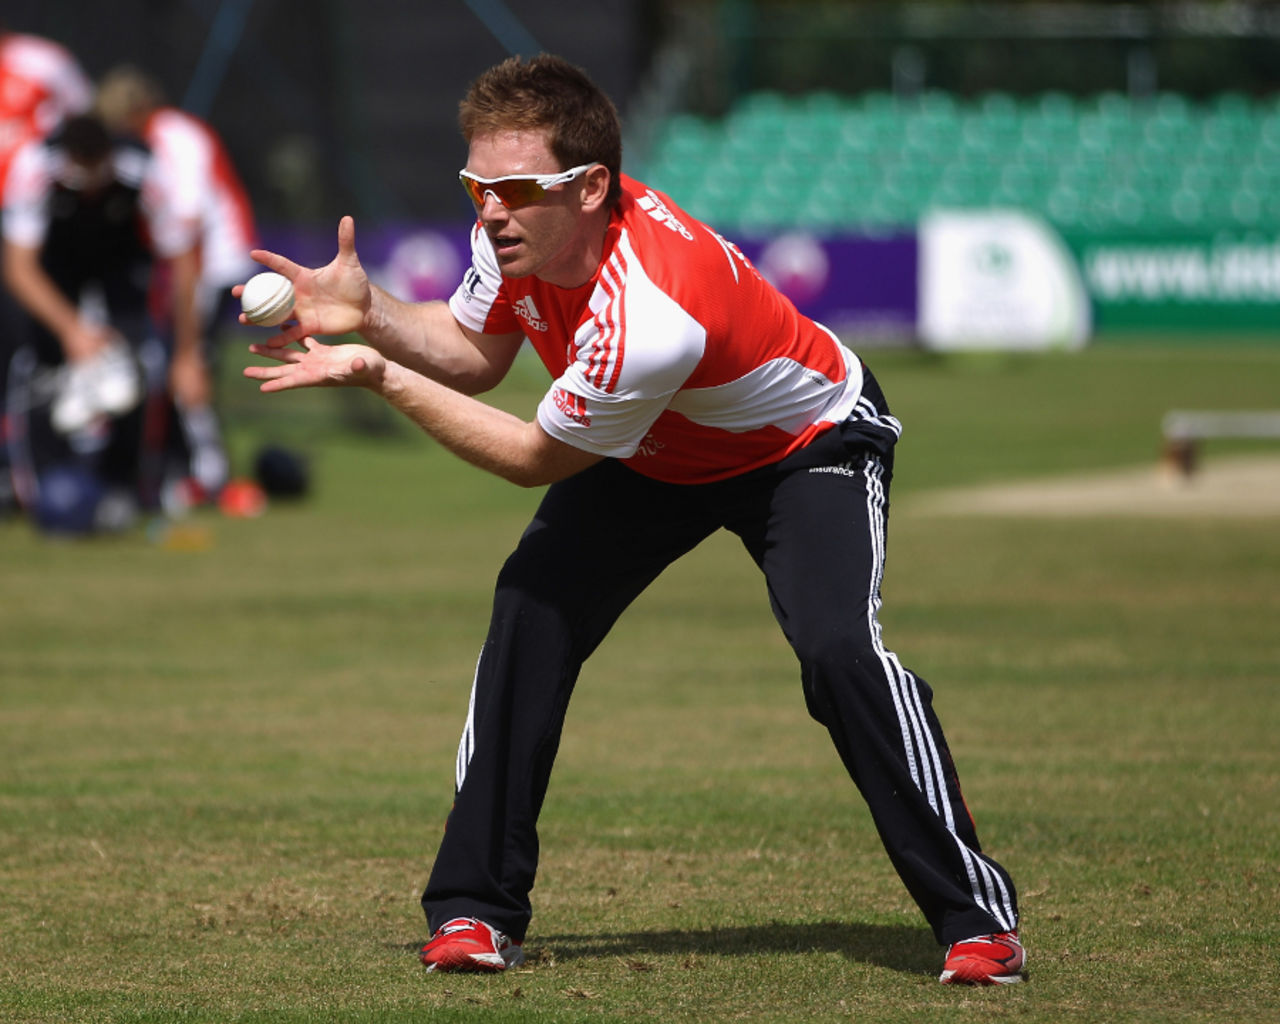 Eoin Morgan sets himself to take a catch during England's practice session, Dublin, Auguest 24 2011